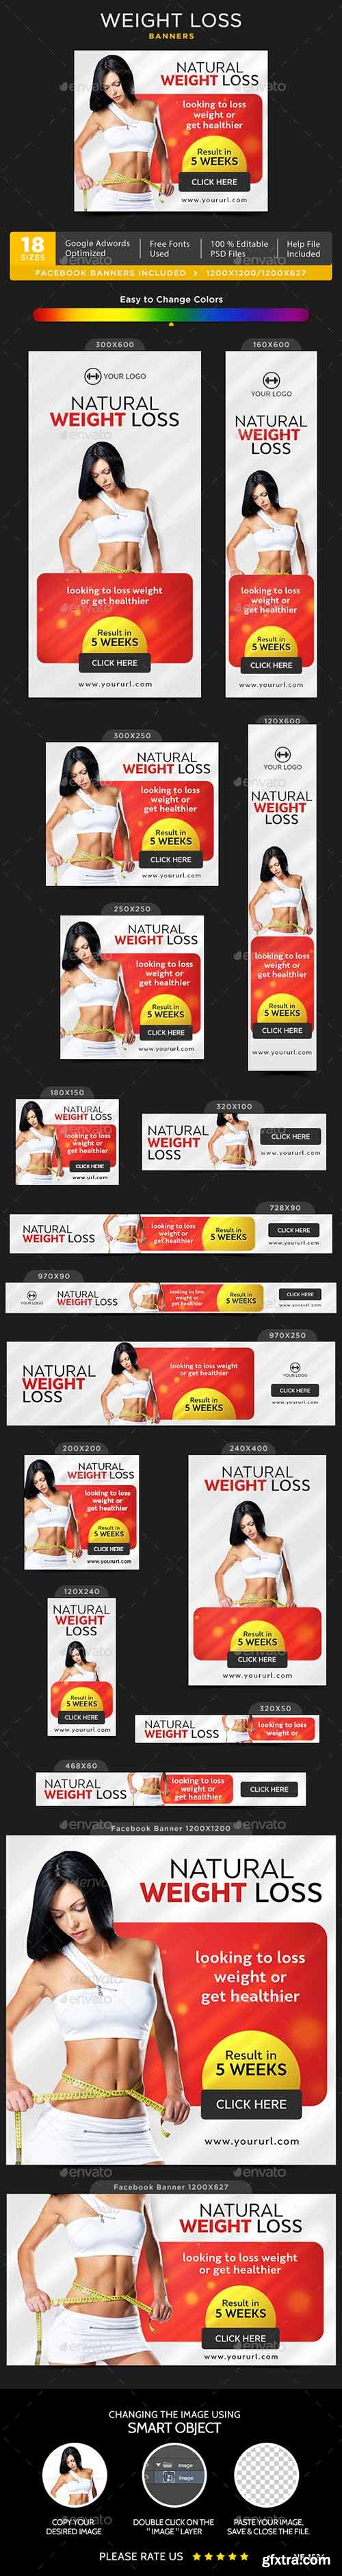 Graphicriver - Fitness Banners Bundle - 10 Sets - 180 Banners 17799479